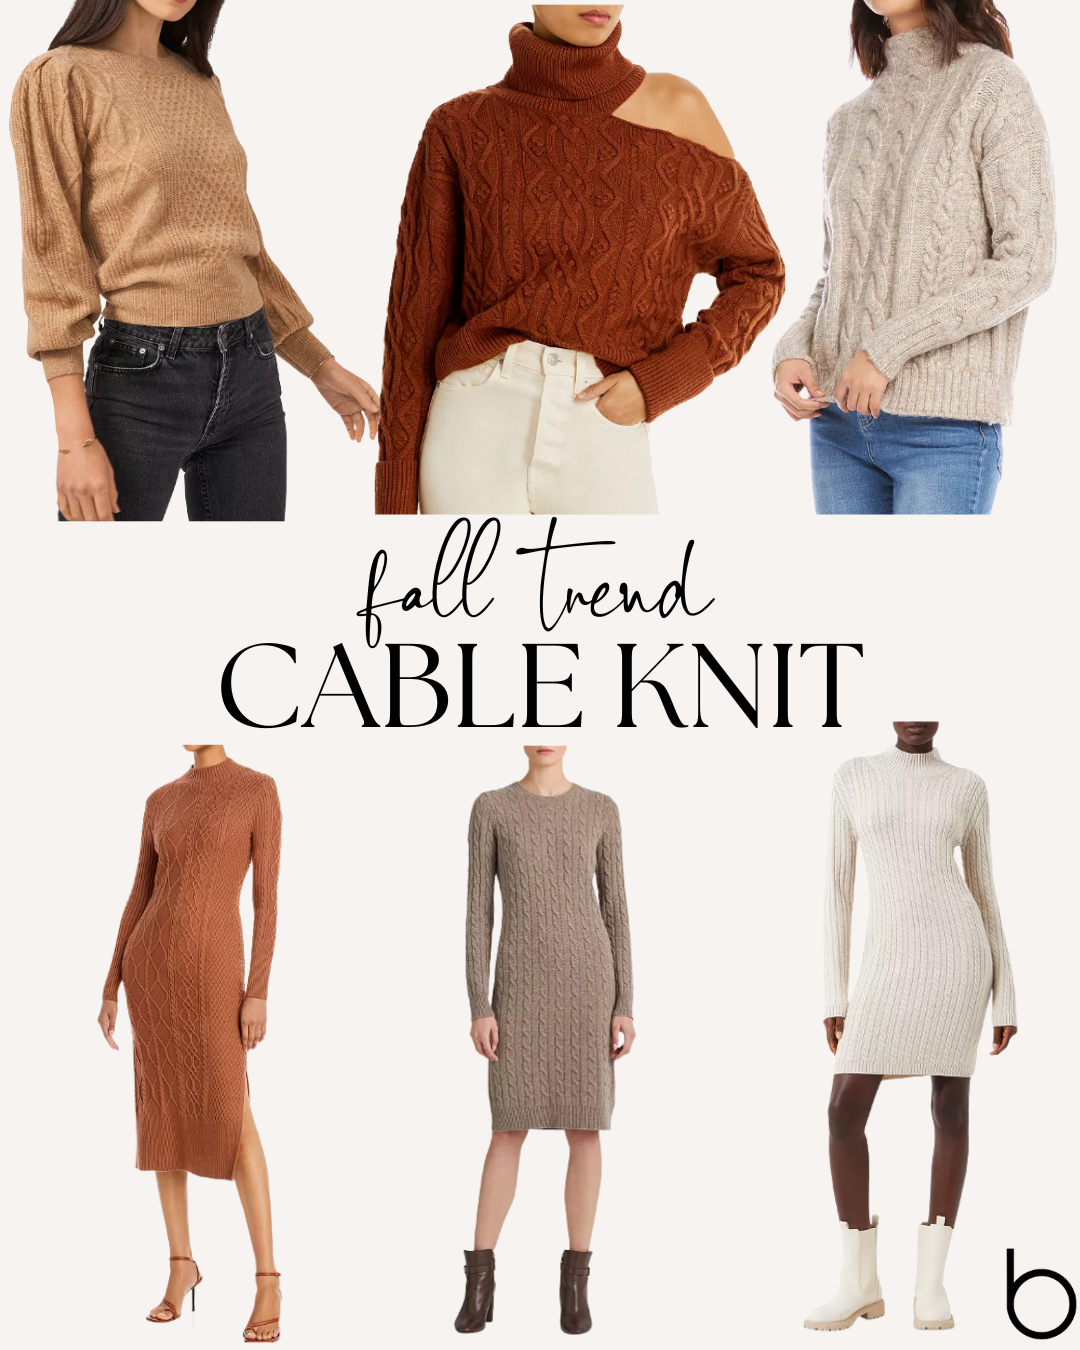 Bloomingdale's Fall Trends - New Fall Fashion Finds at Bloomingdales | Bloomingdale's Designer Clothing for Fall 2022